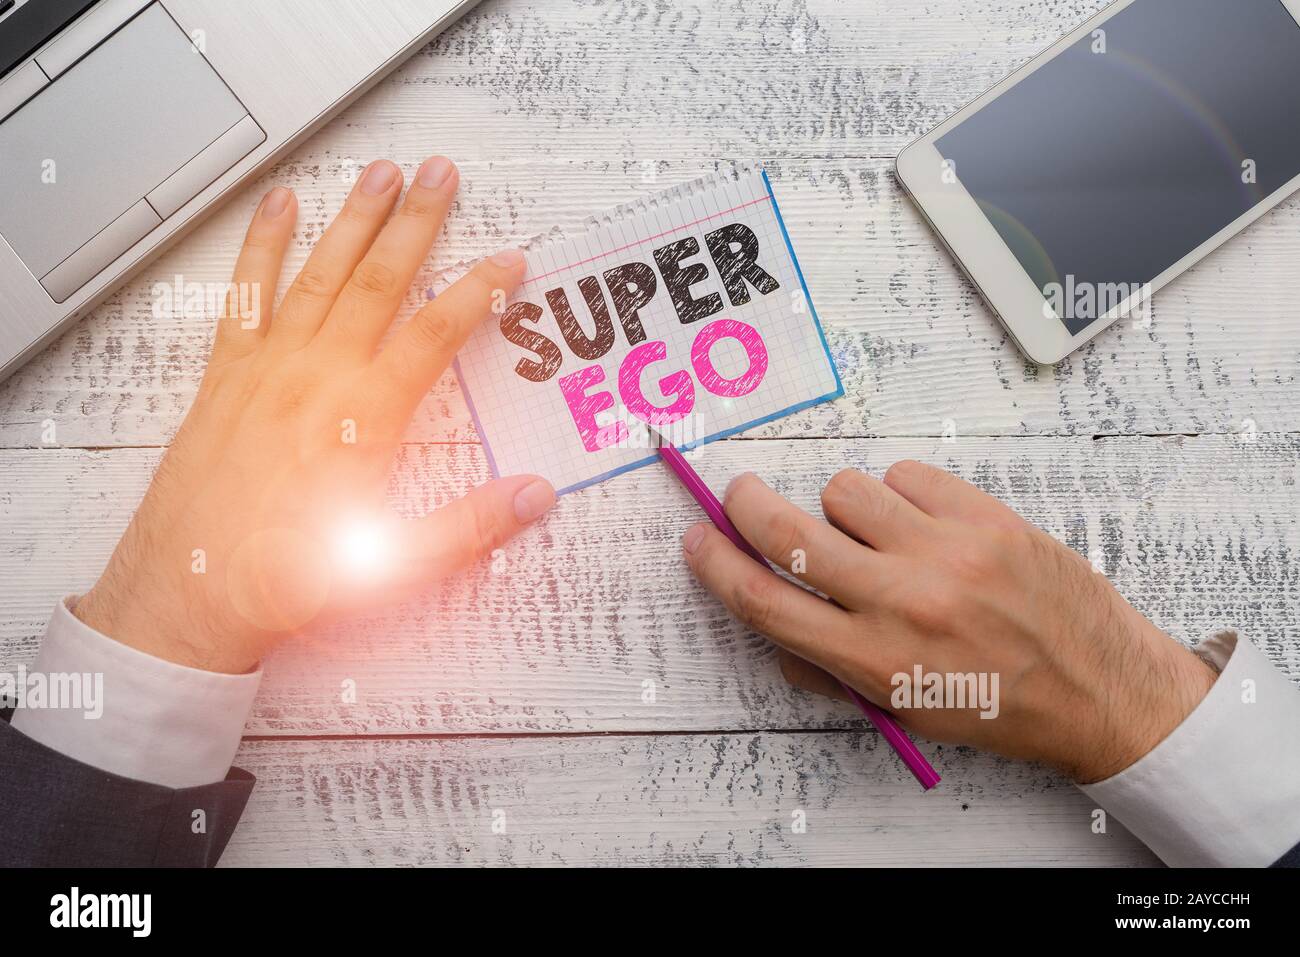 Writing note showing Super Ego. Business photo showcasing The I or self of any demonstrating that is empowering his whole soul. Stock Photo